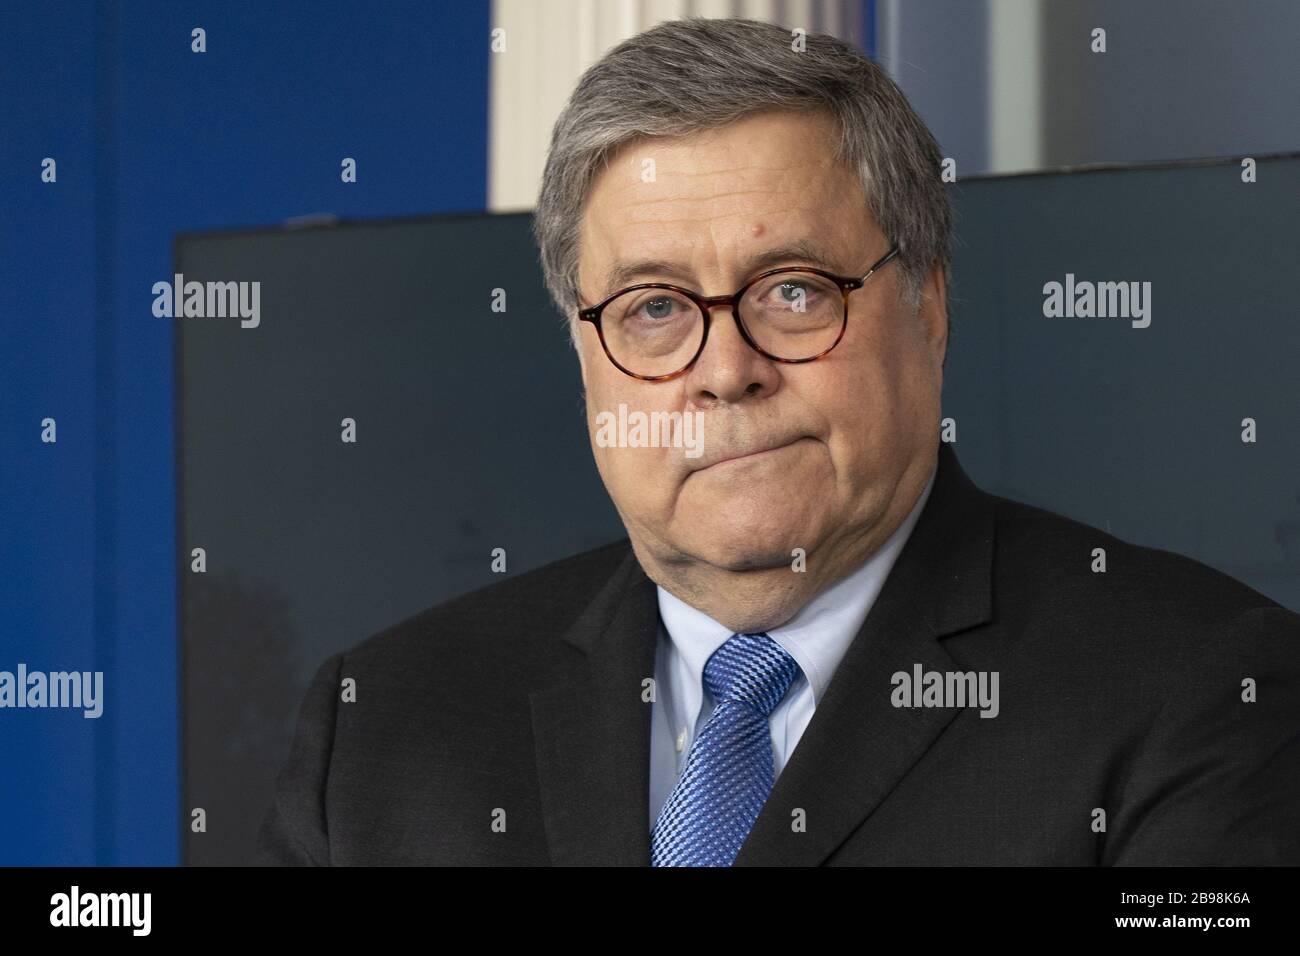 Washington, United States. 23rd Mar, 2020. United States Attorney General William P. Barr participates in a news briefing by members of the Coronavirus Task Force at the White House in Washington, DC on March 23, 2020. Photo by Chris Kleponis/UPI Credit: UPI/Alamy Live News Stock Photo